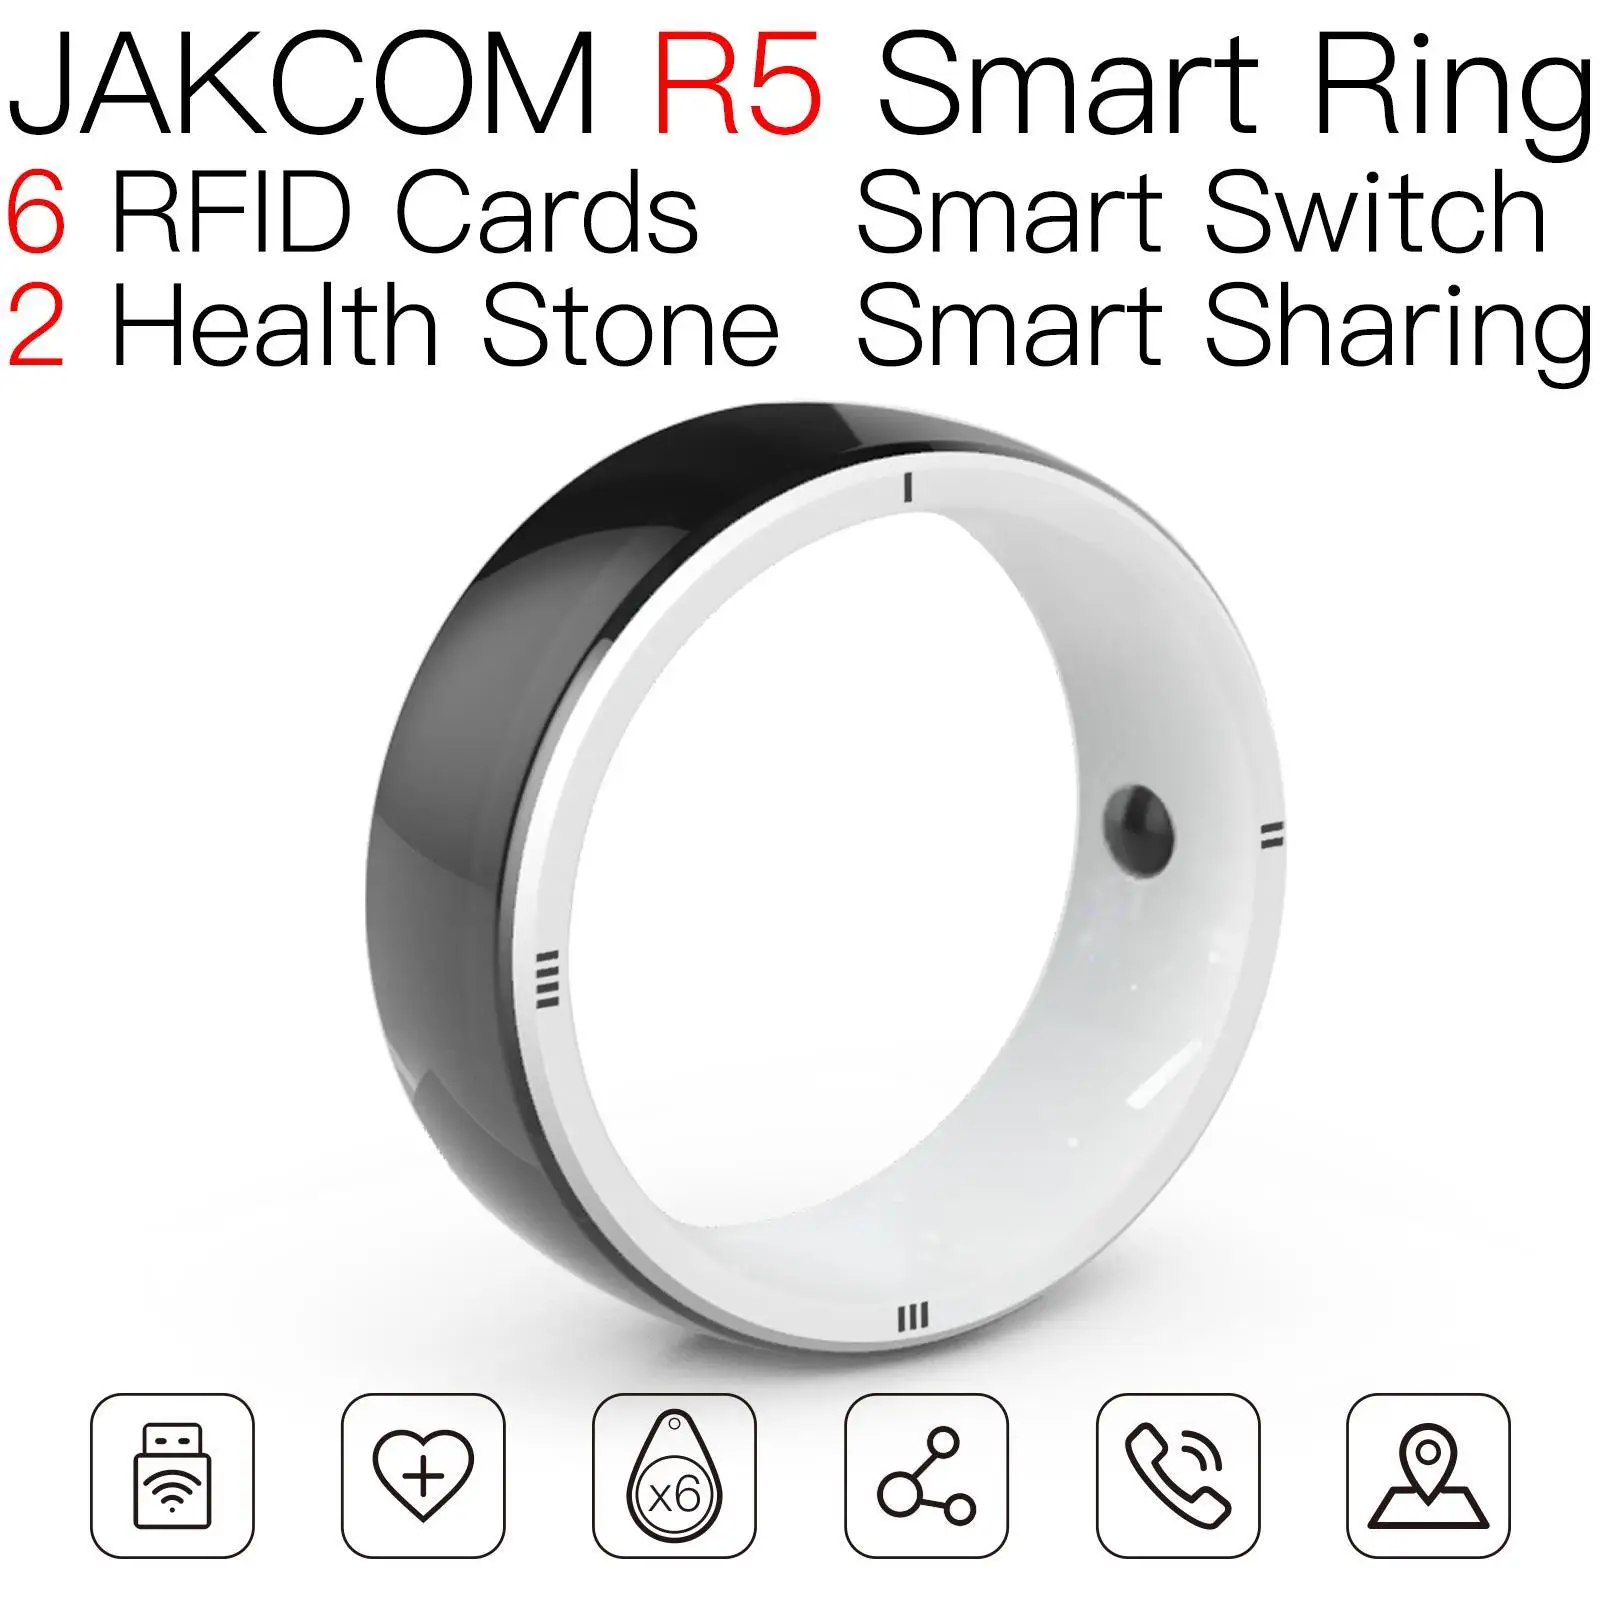 

JAKCOM R5 Smart Ring New arrival as mini velo bicycle geenfc access controller rfid reader microchip electronic